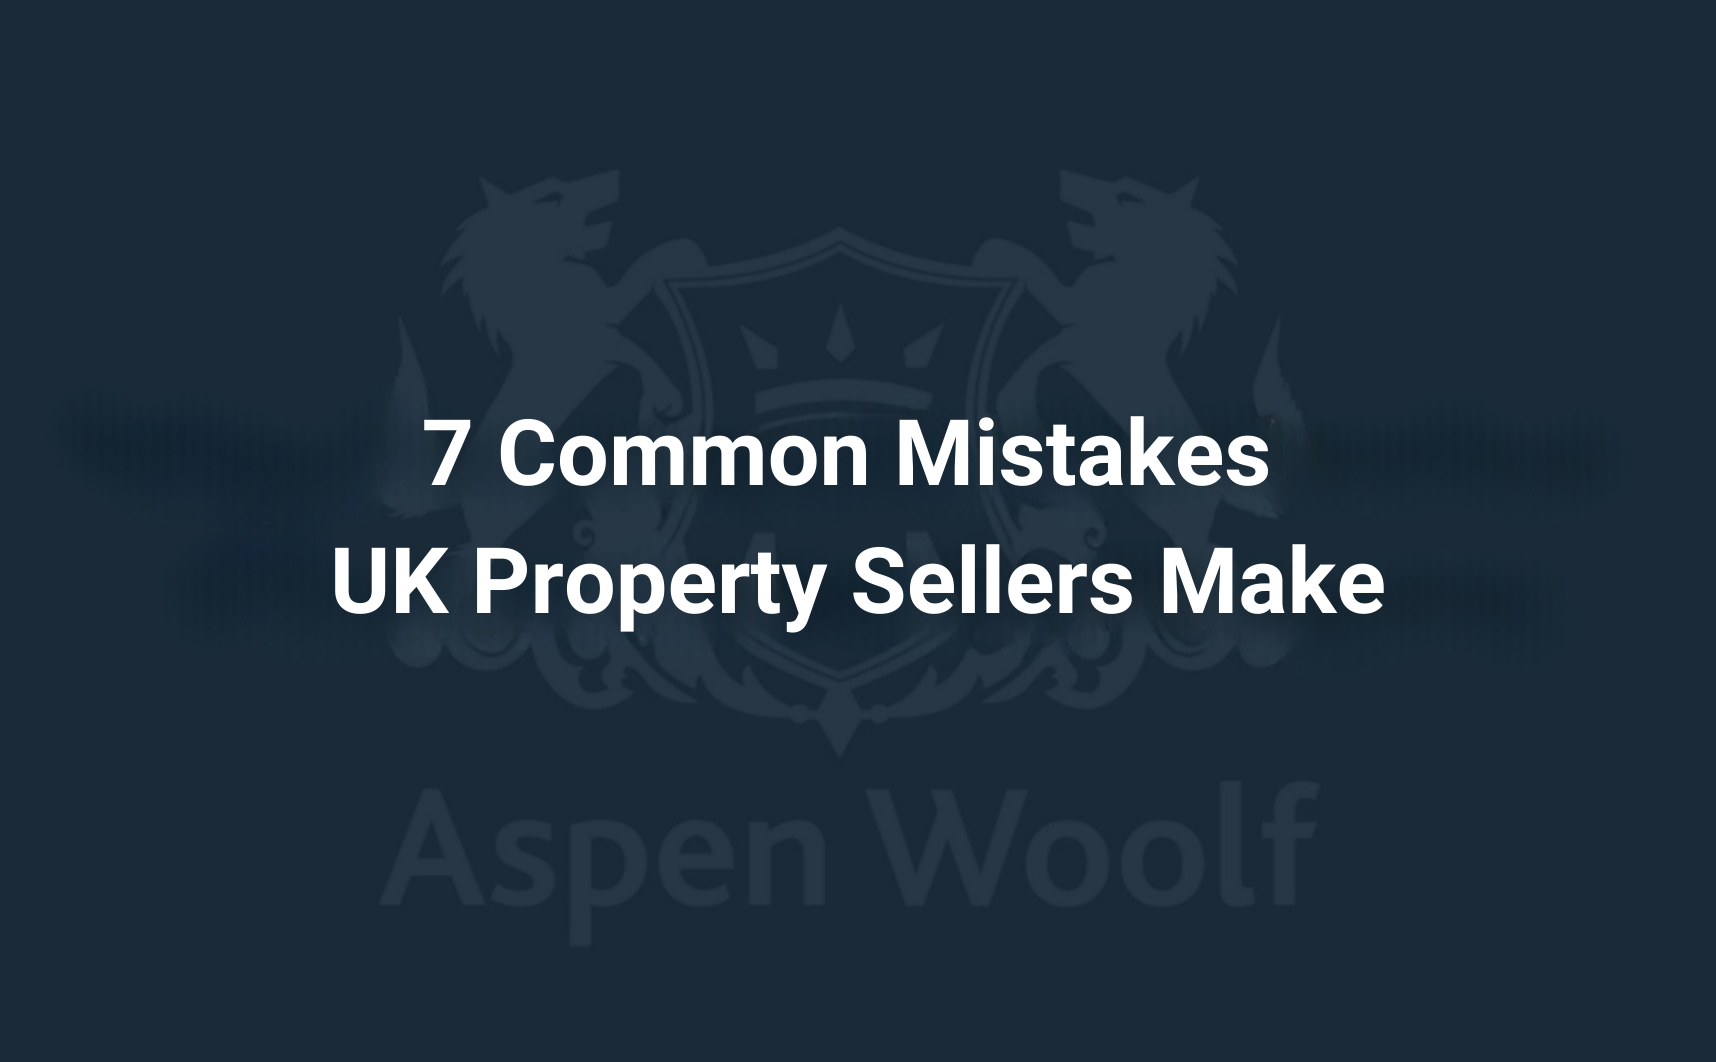 7 Common Mistakes UK Property Sellers Make